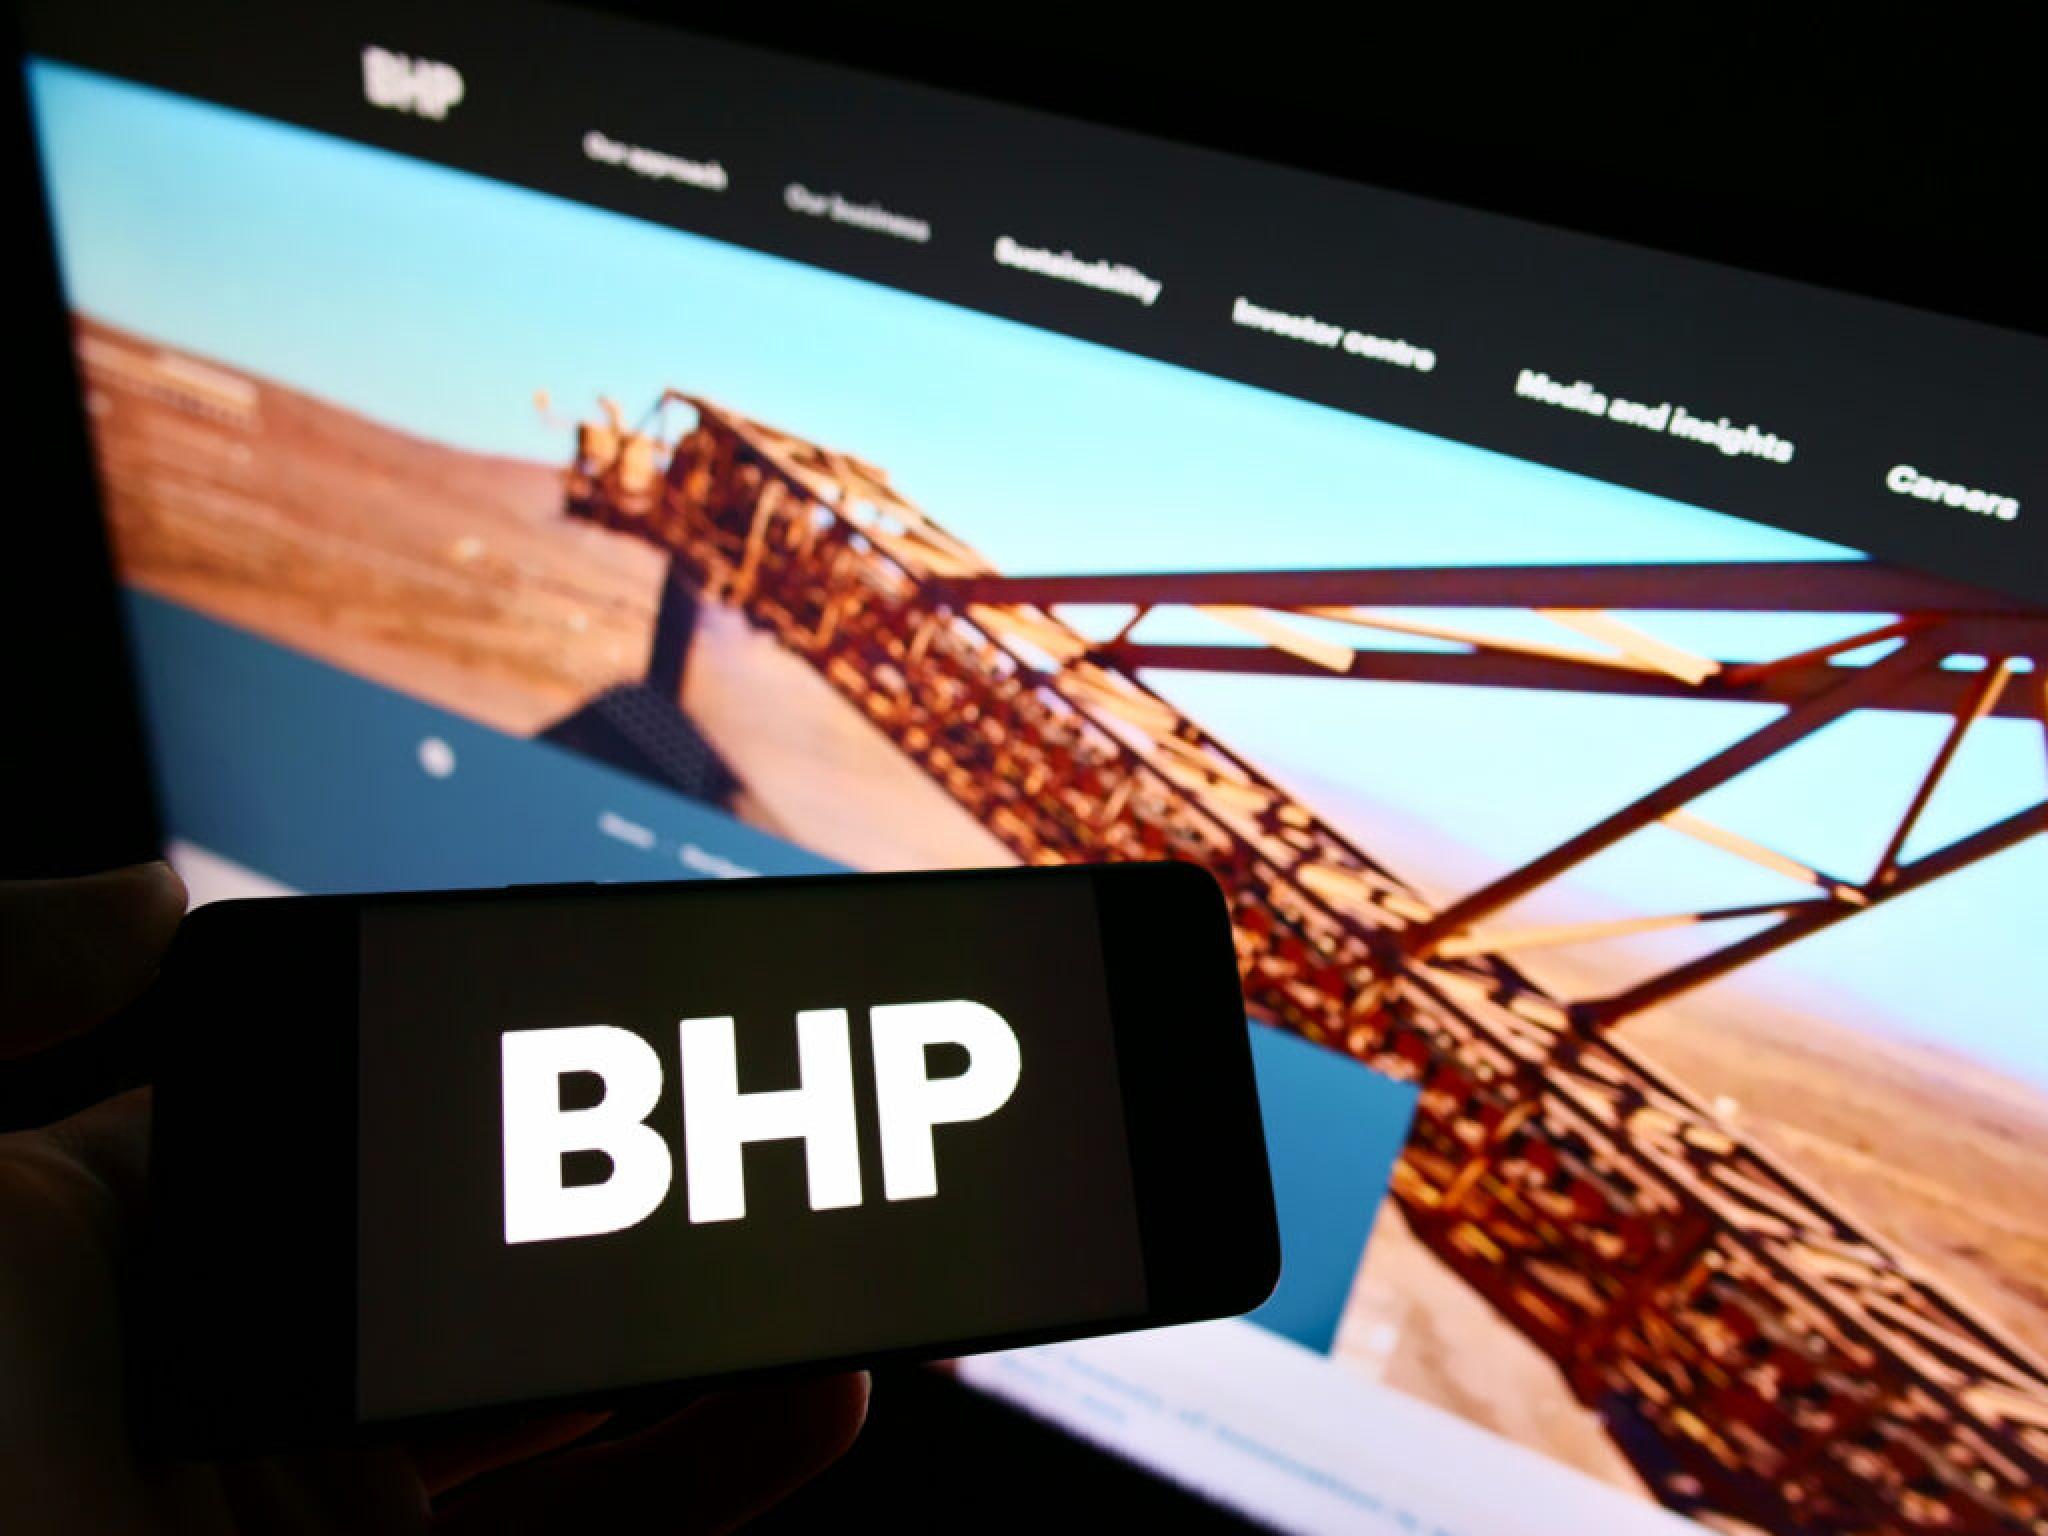  bhp-cuts-employee-incentives-misses-performance-goals 